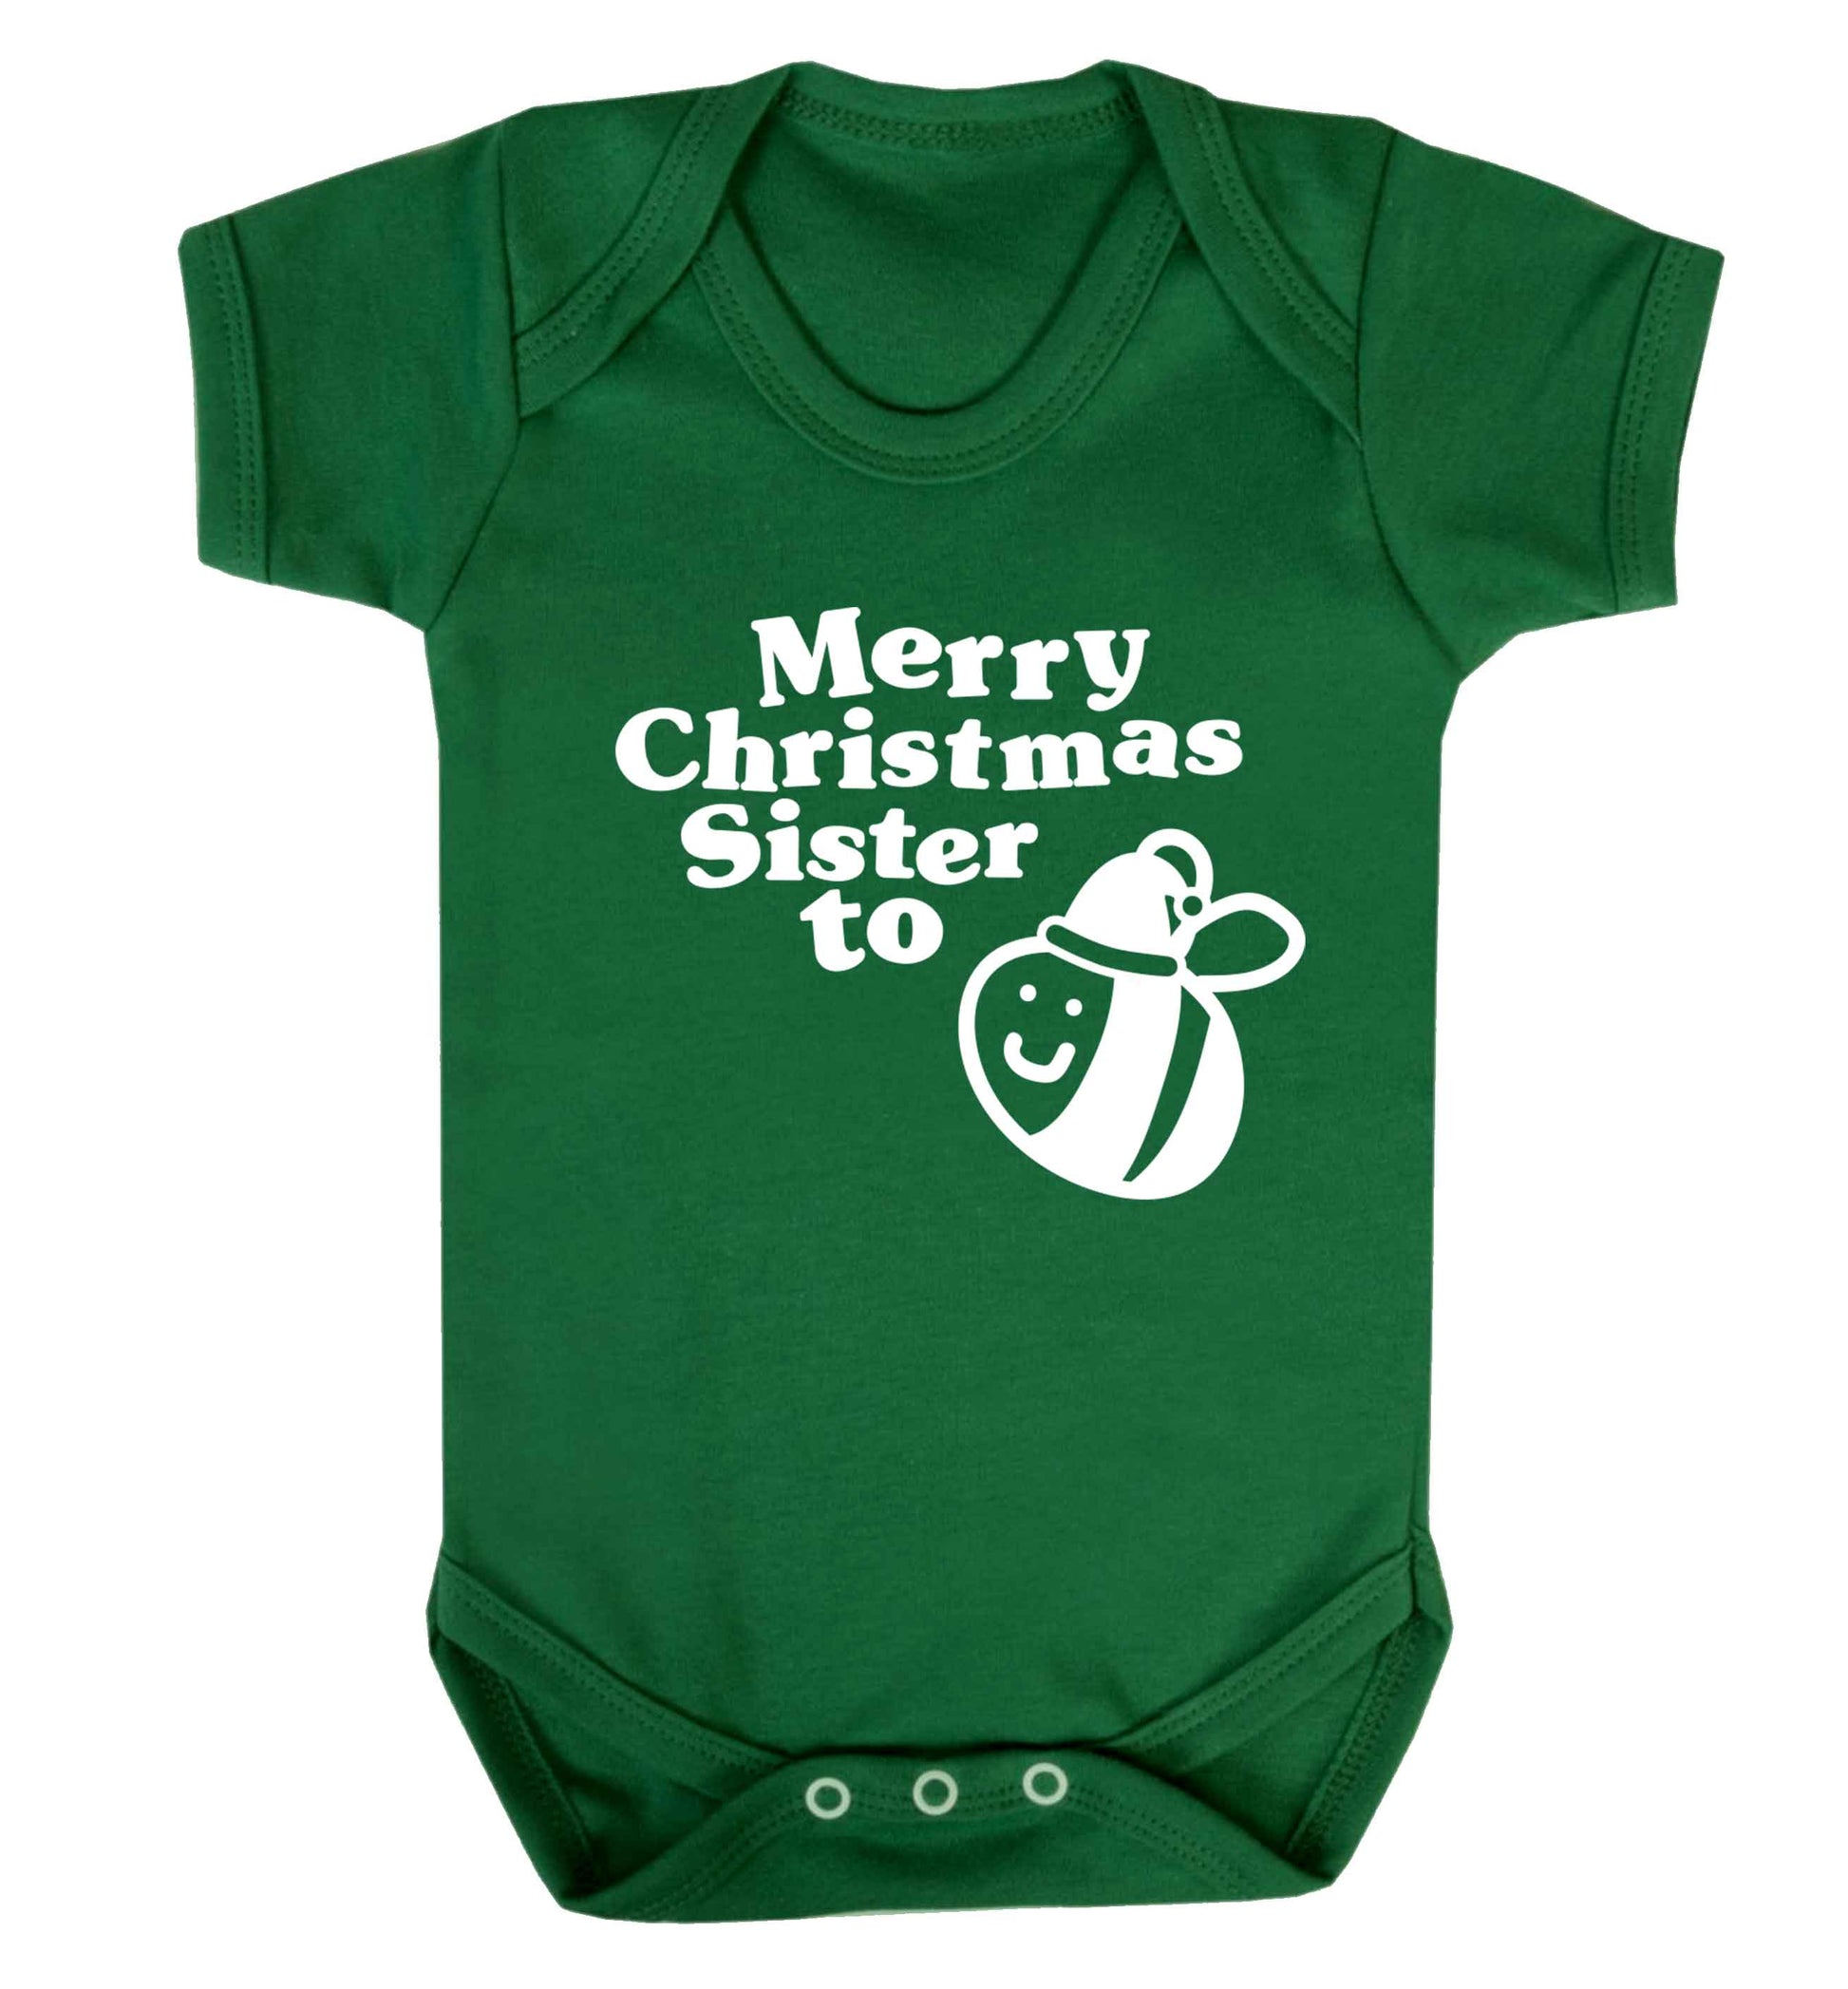 Merry Christmas sister to be Baby Vest green 18-24 months